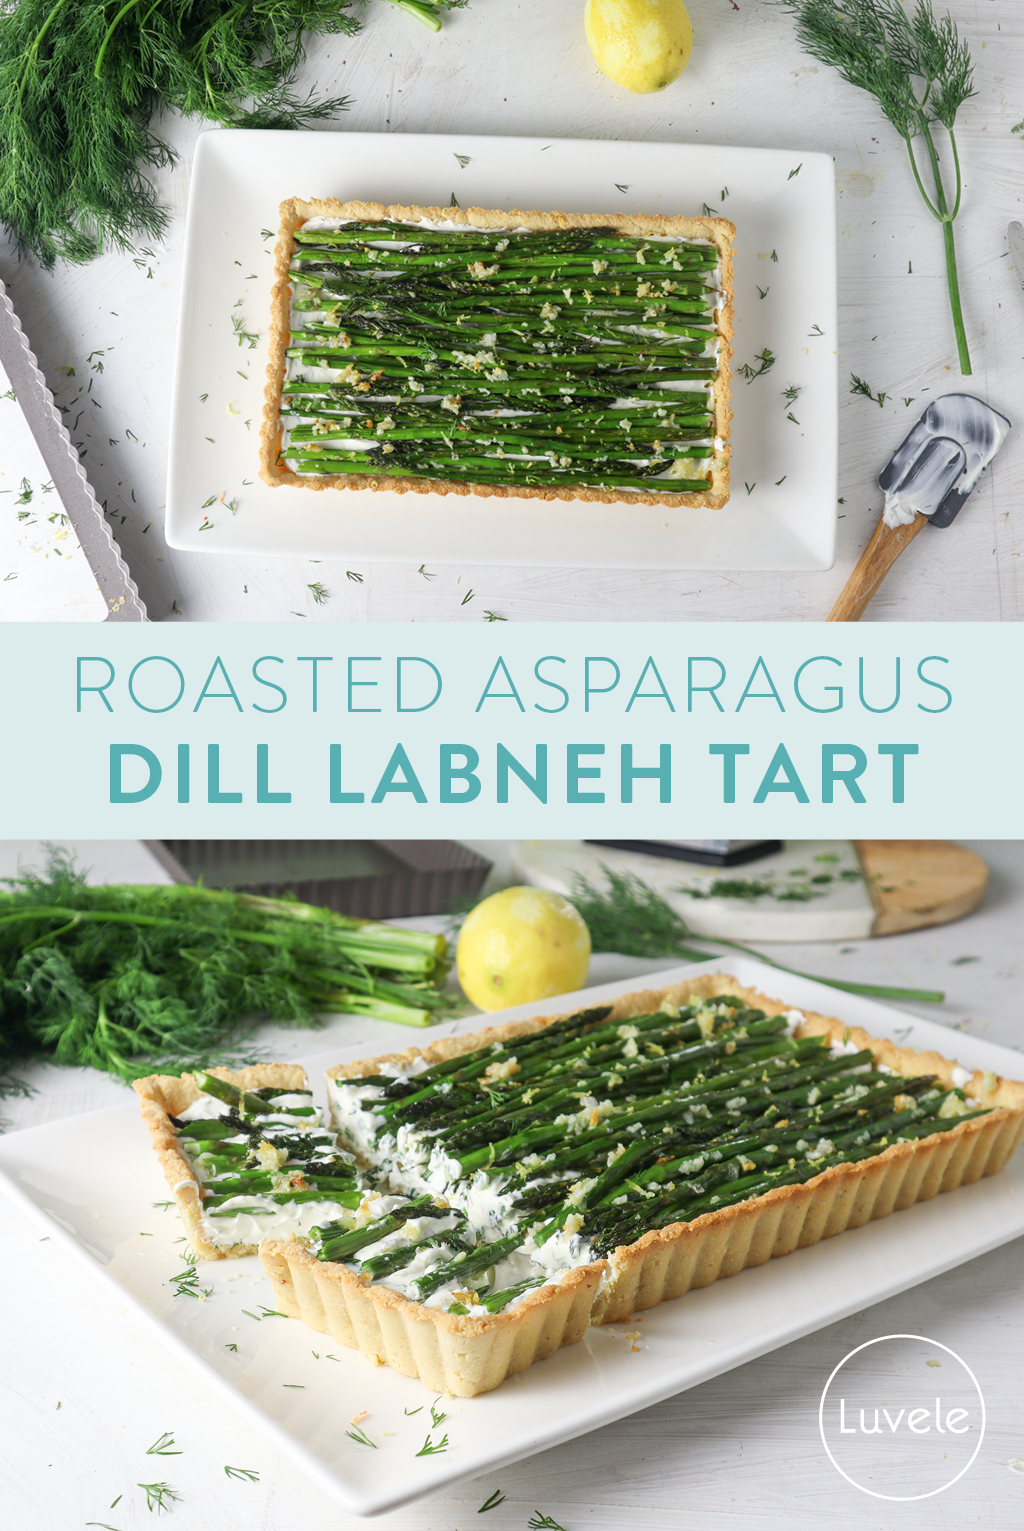 Asparagus and dill labneh tart